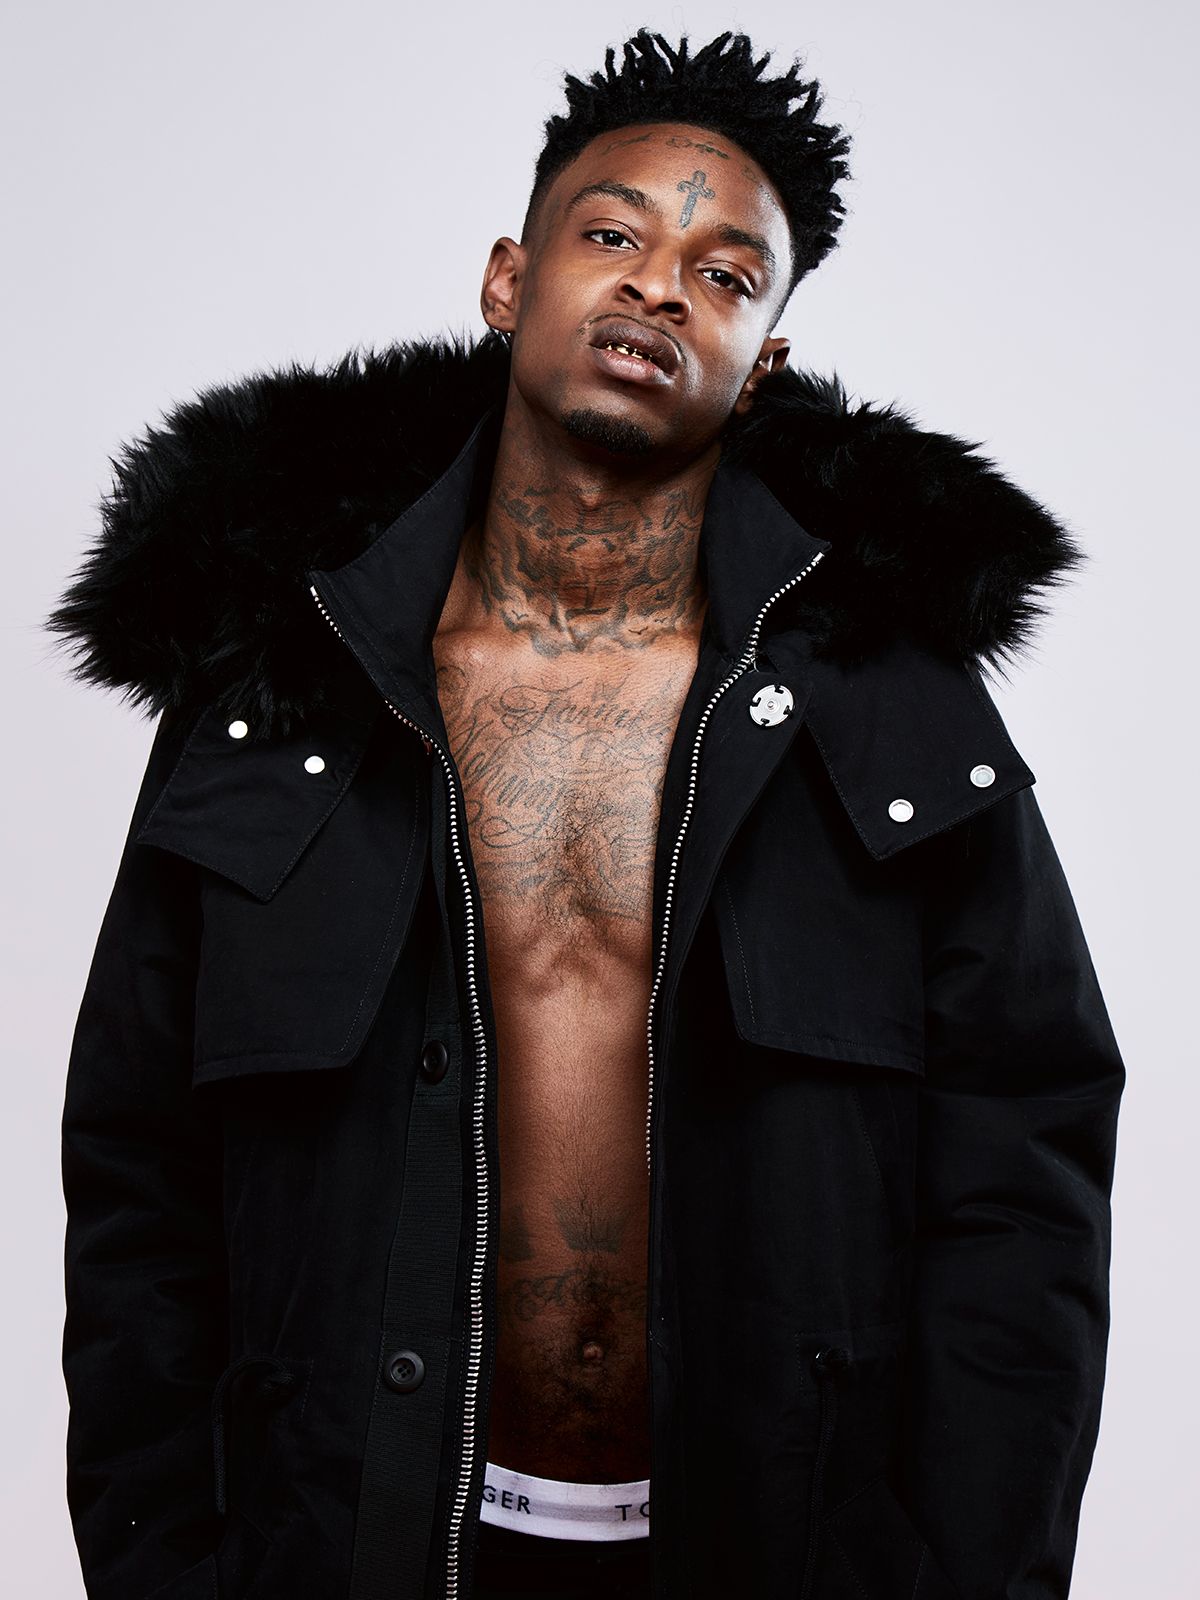 21 Savage Wallpapers - Top 35 Best 21 Savage Pictures & Images Download